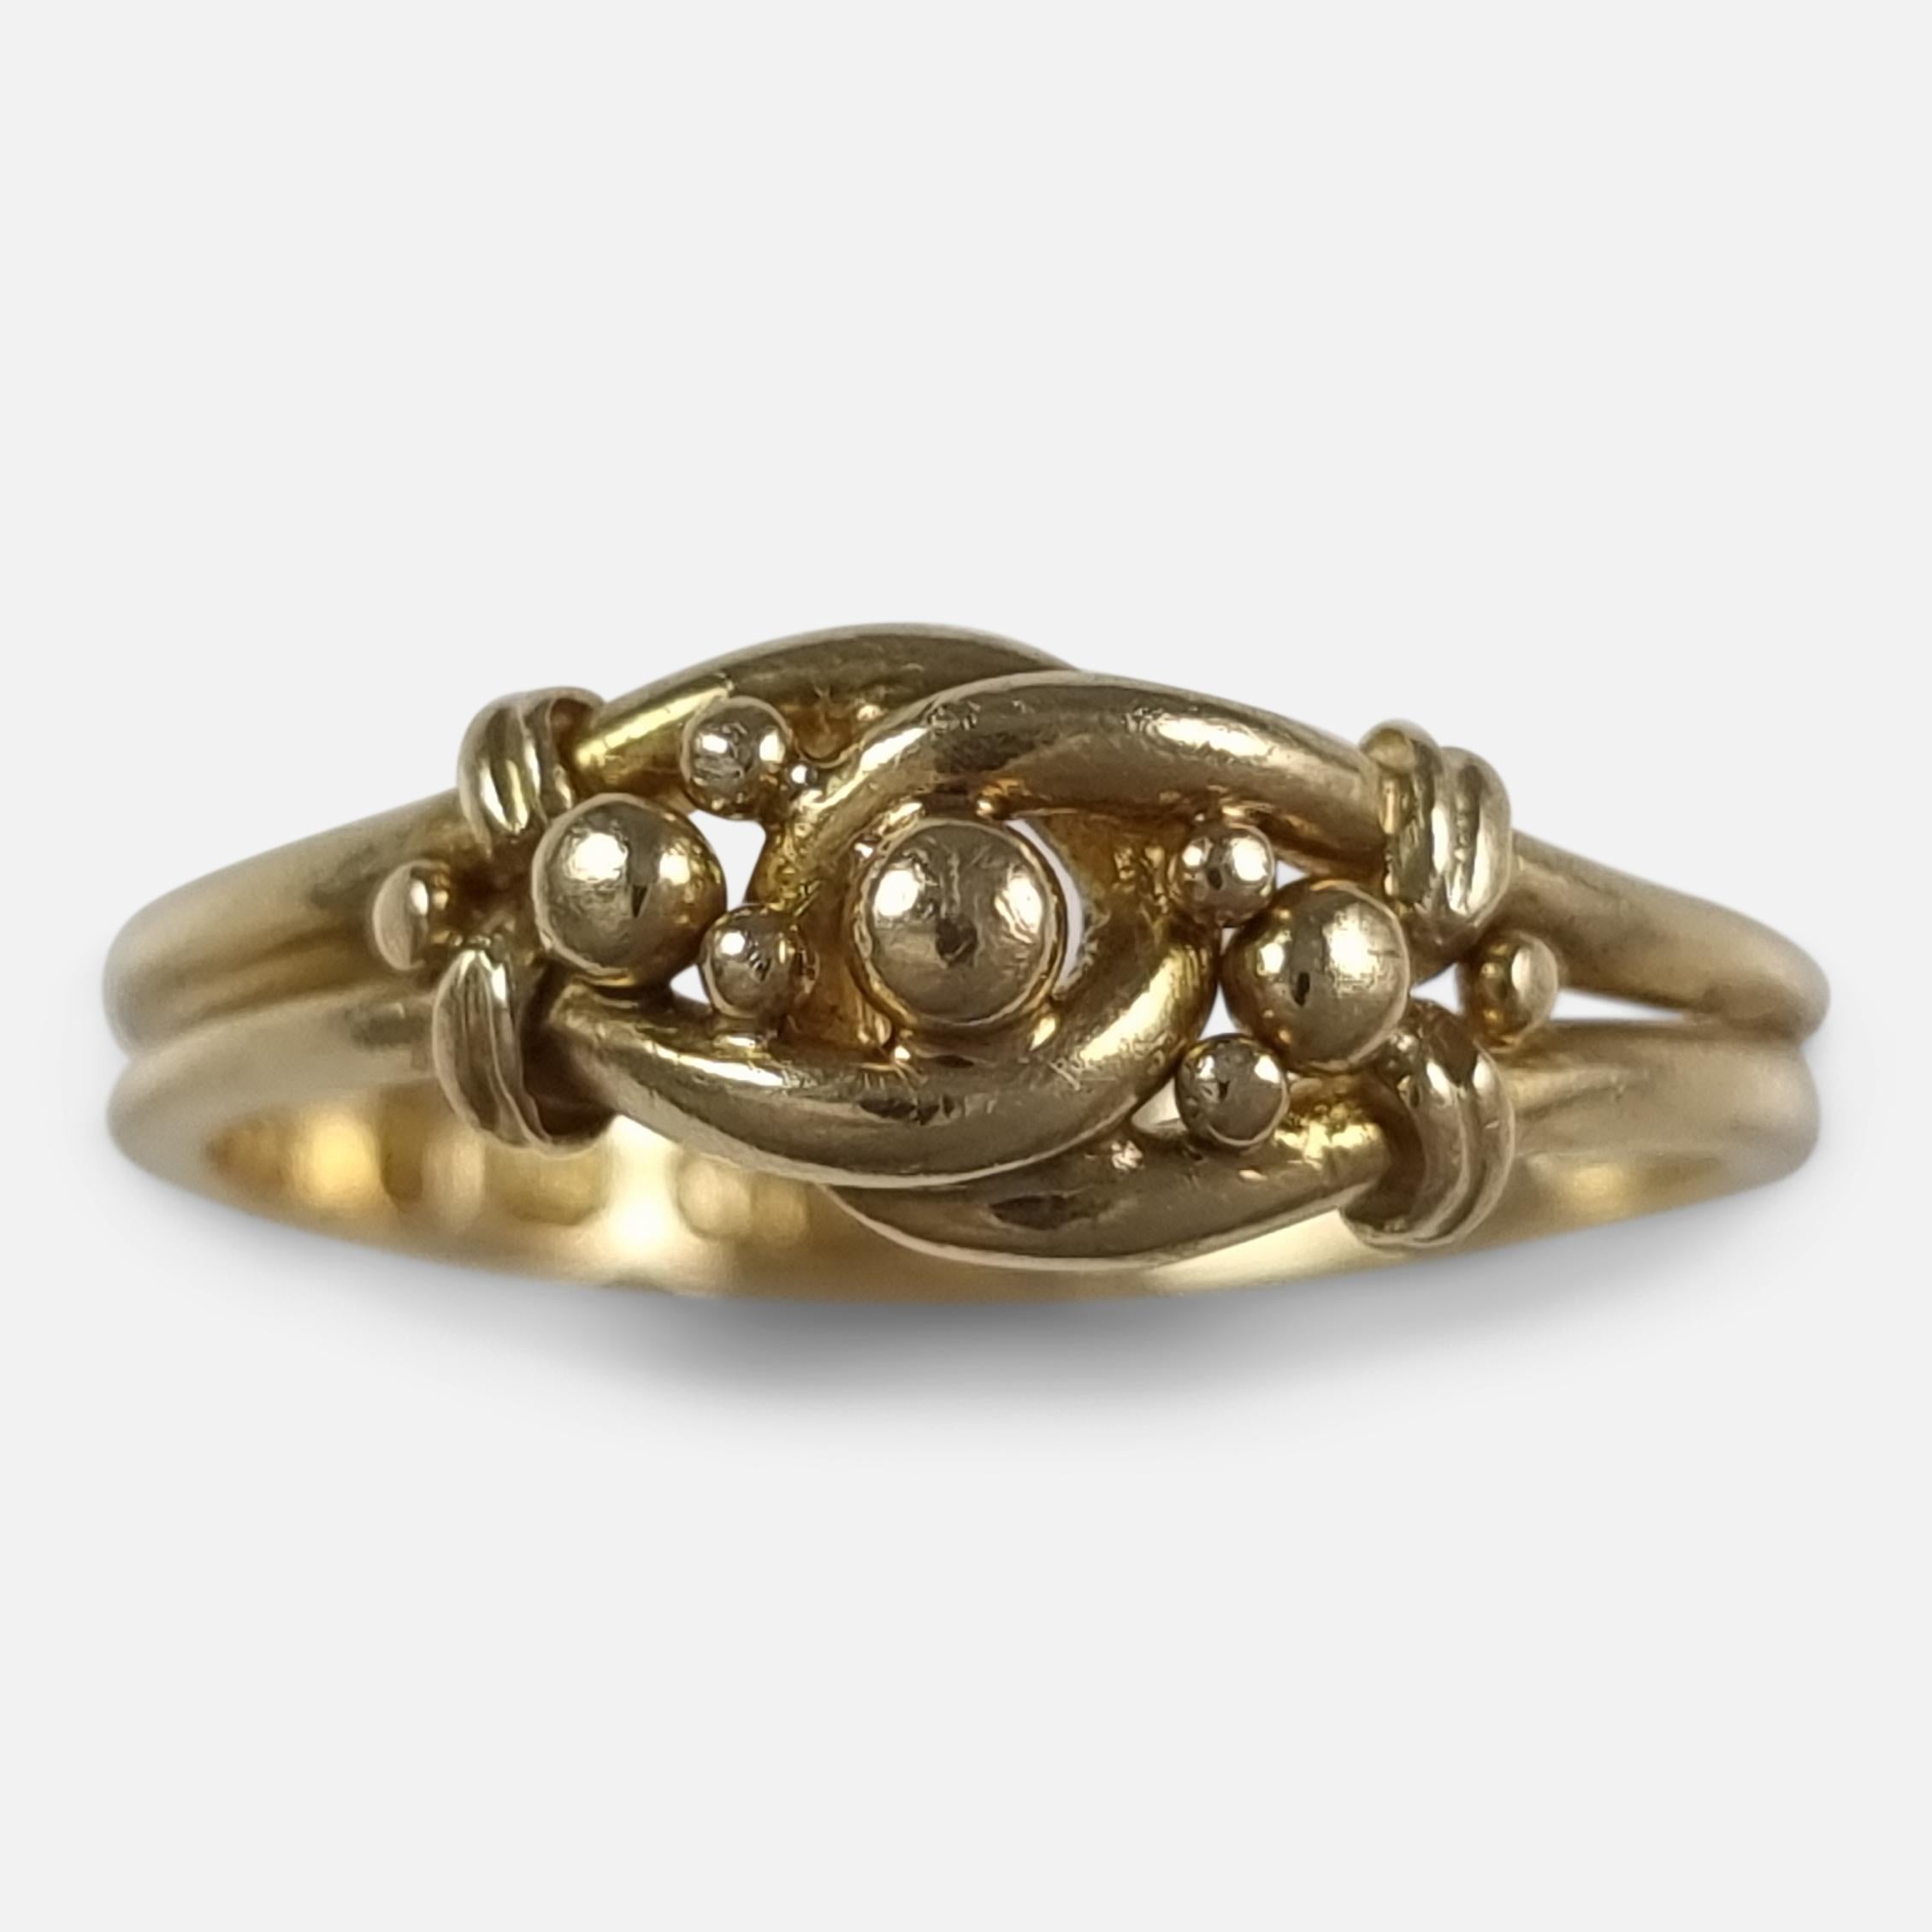 A Victorian 18ct yellow gold 